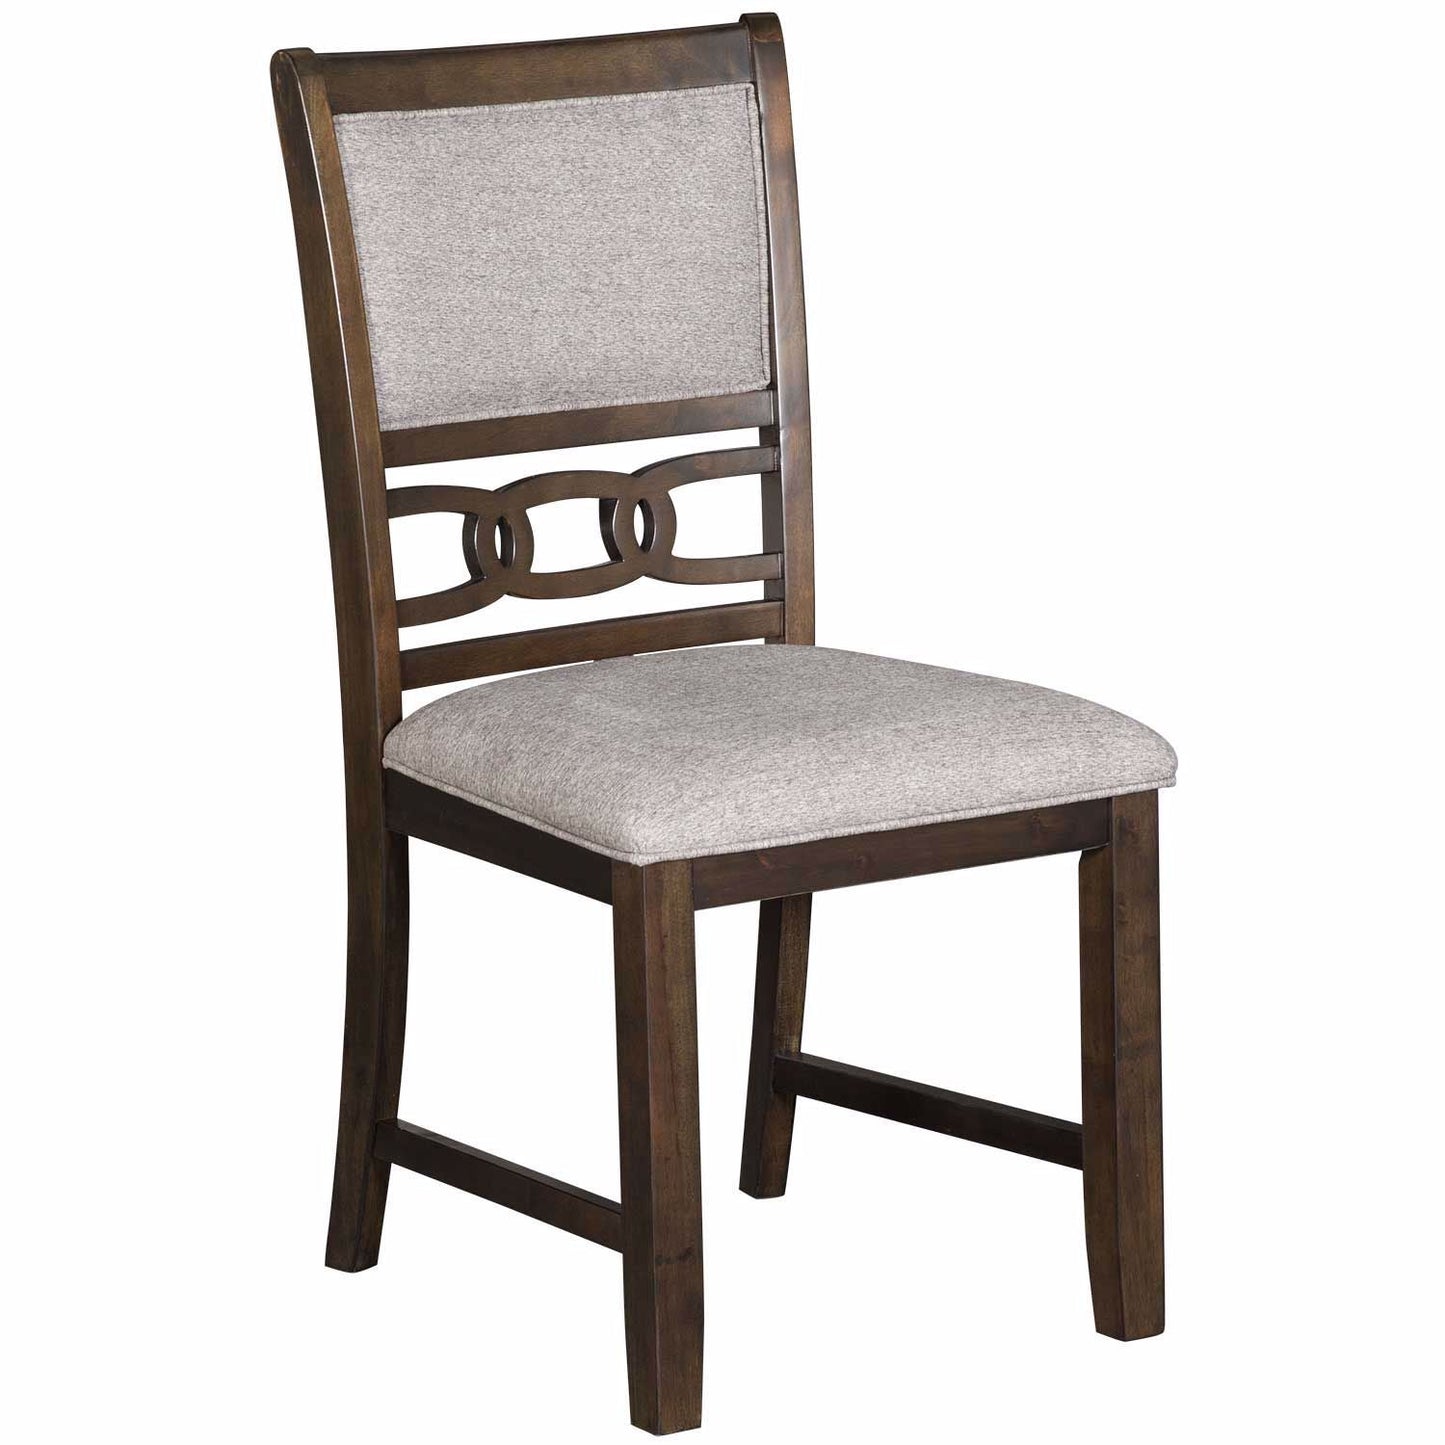 Amherst chairs